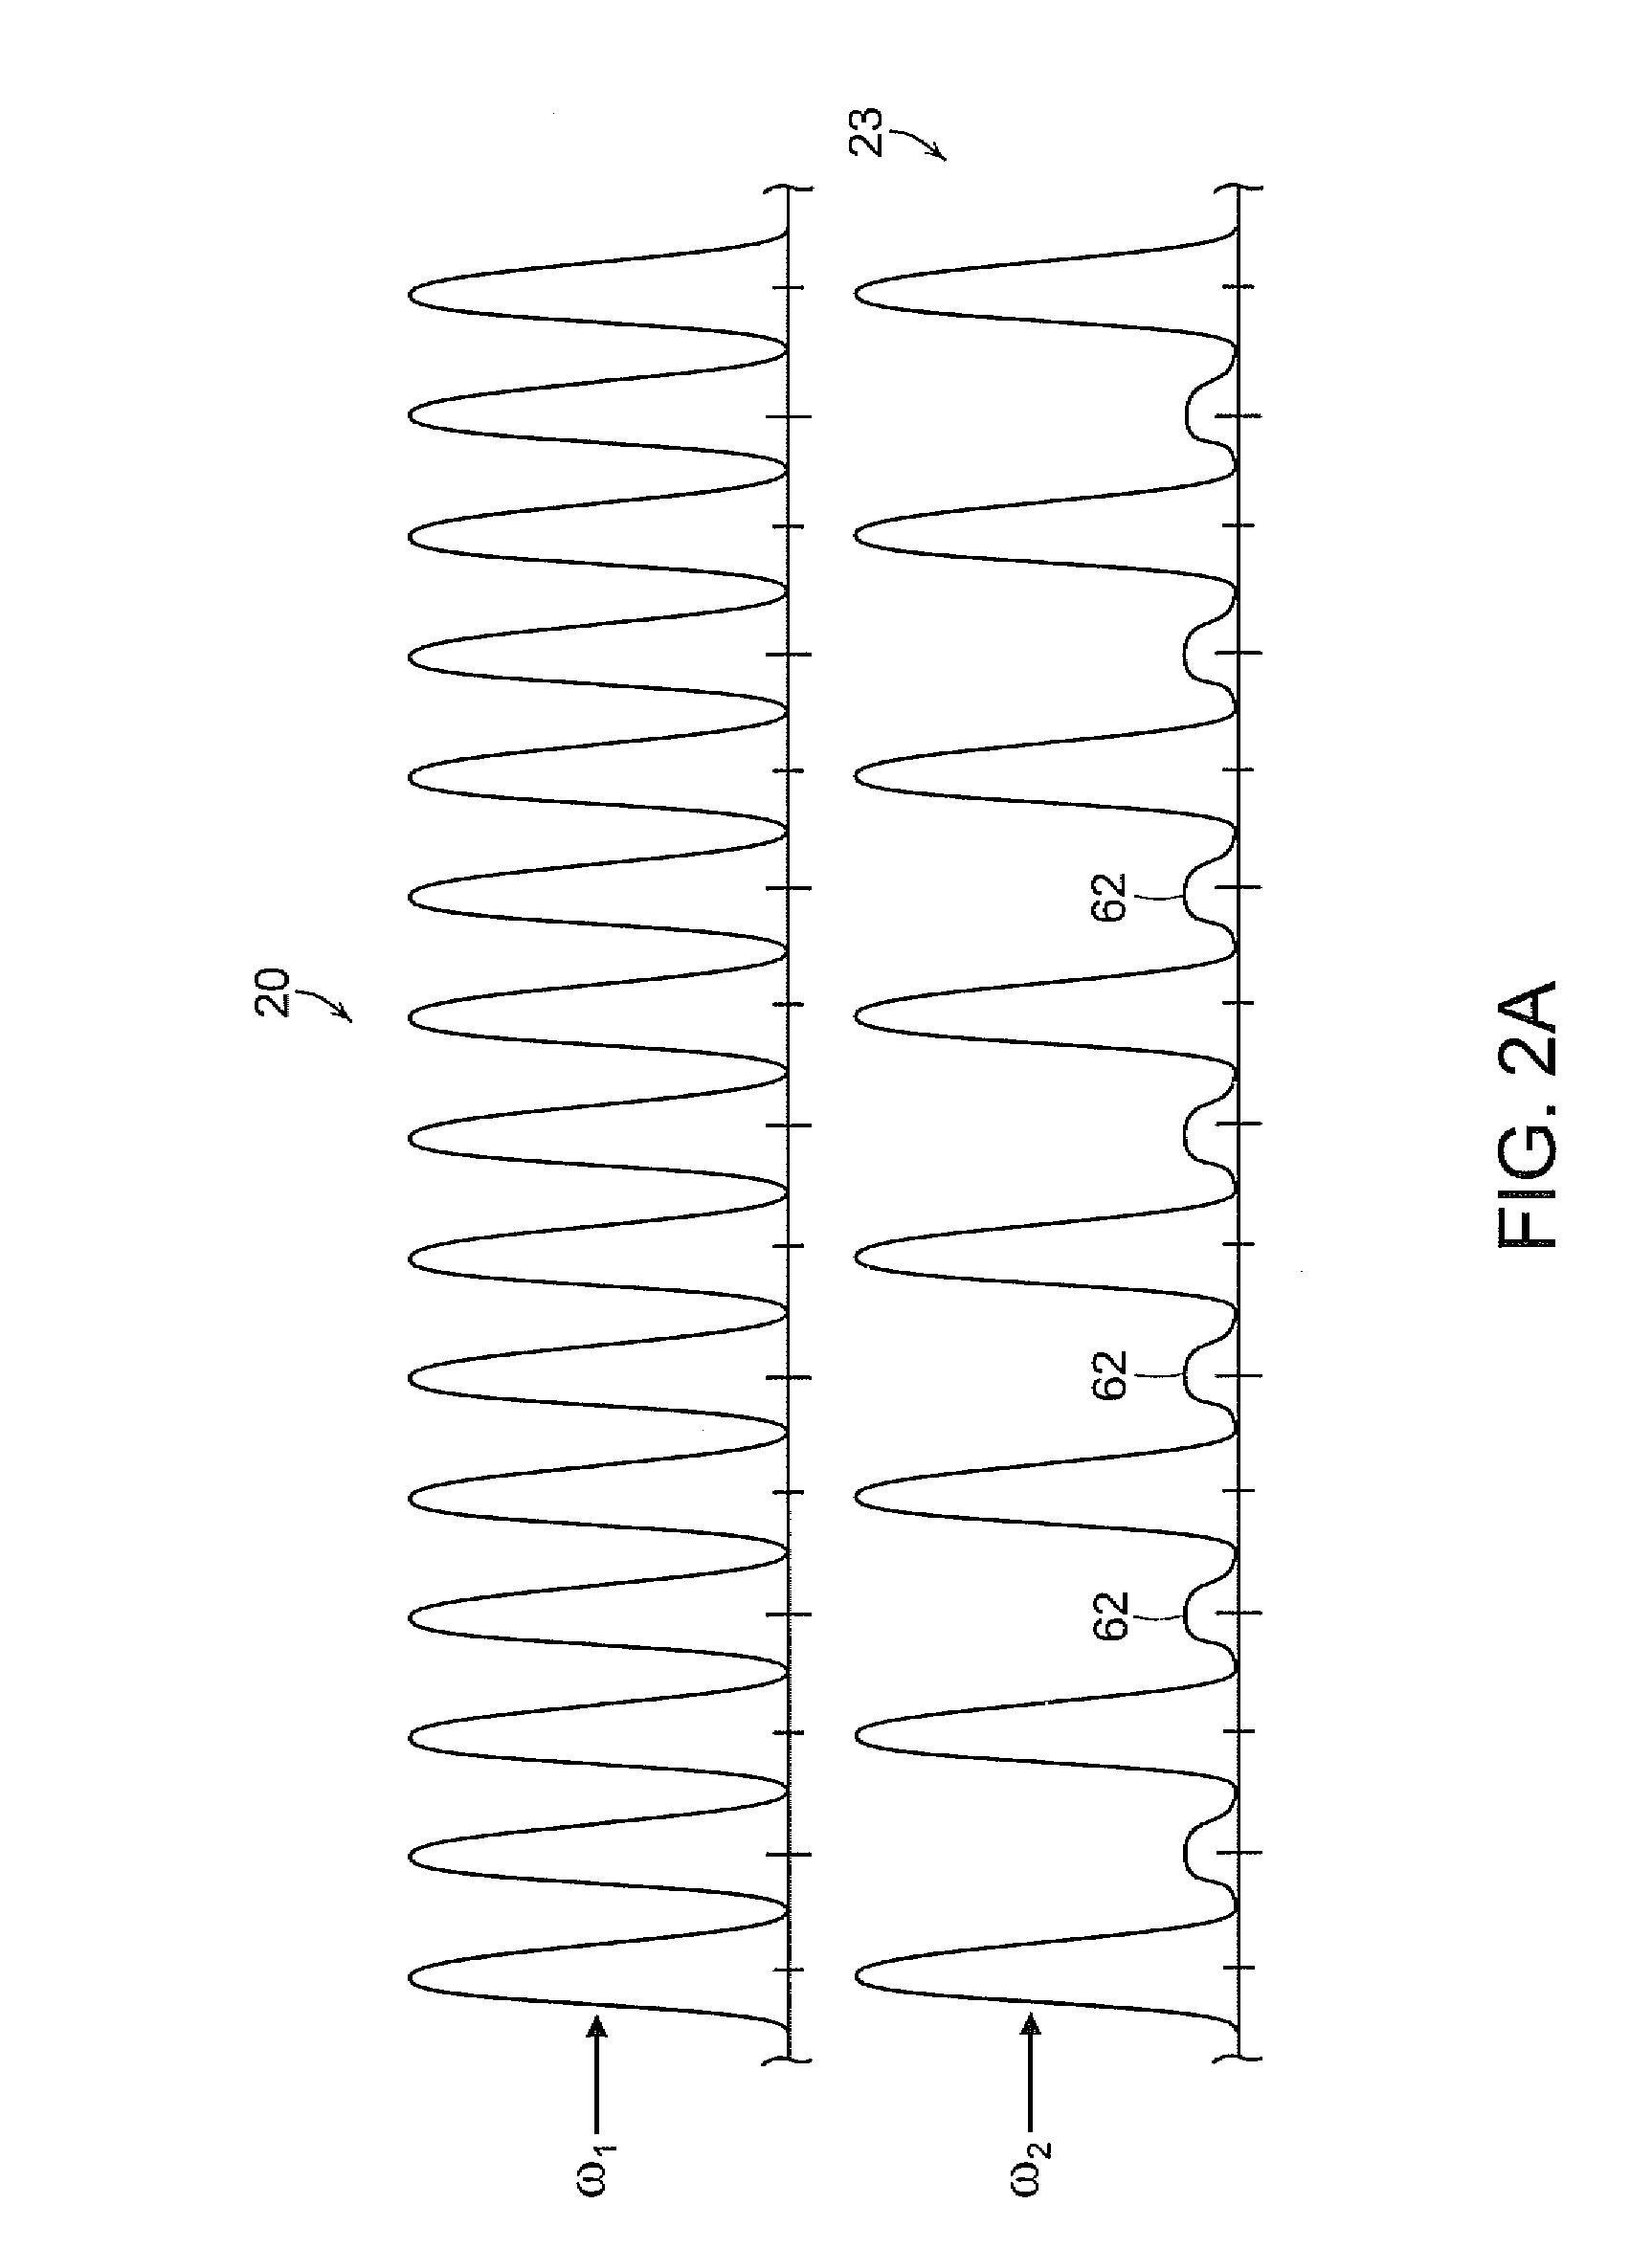 Microscopy imaging system and method employing stimulated raman spectroscopy as a contrast mechanism